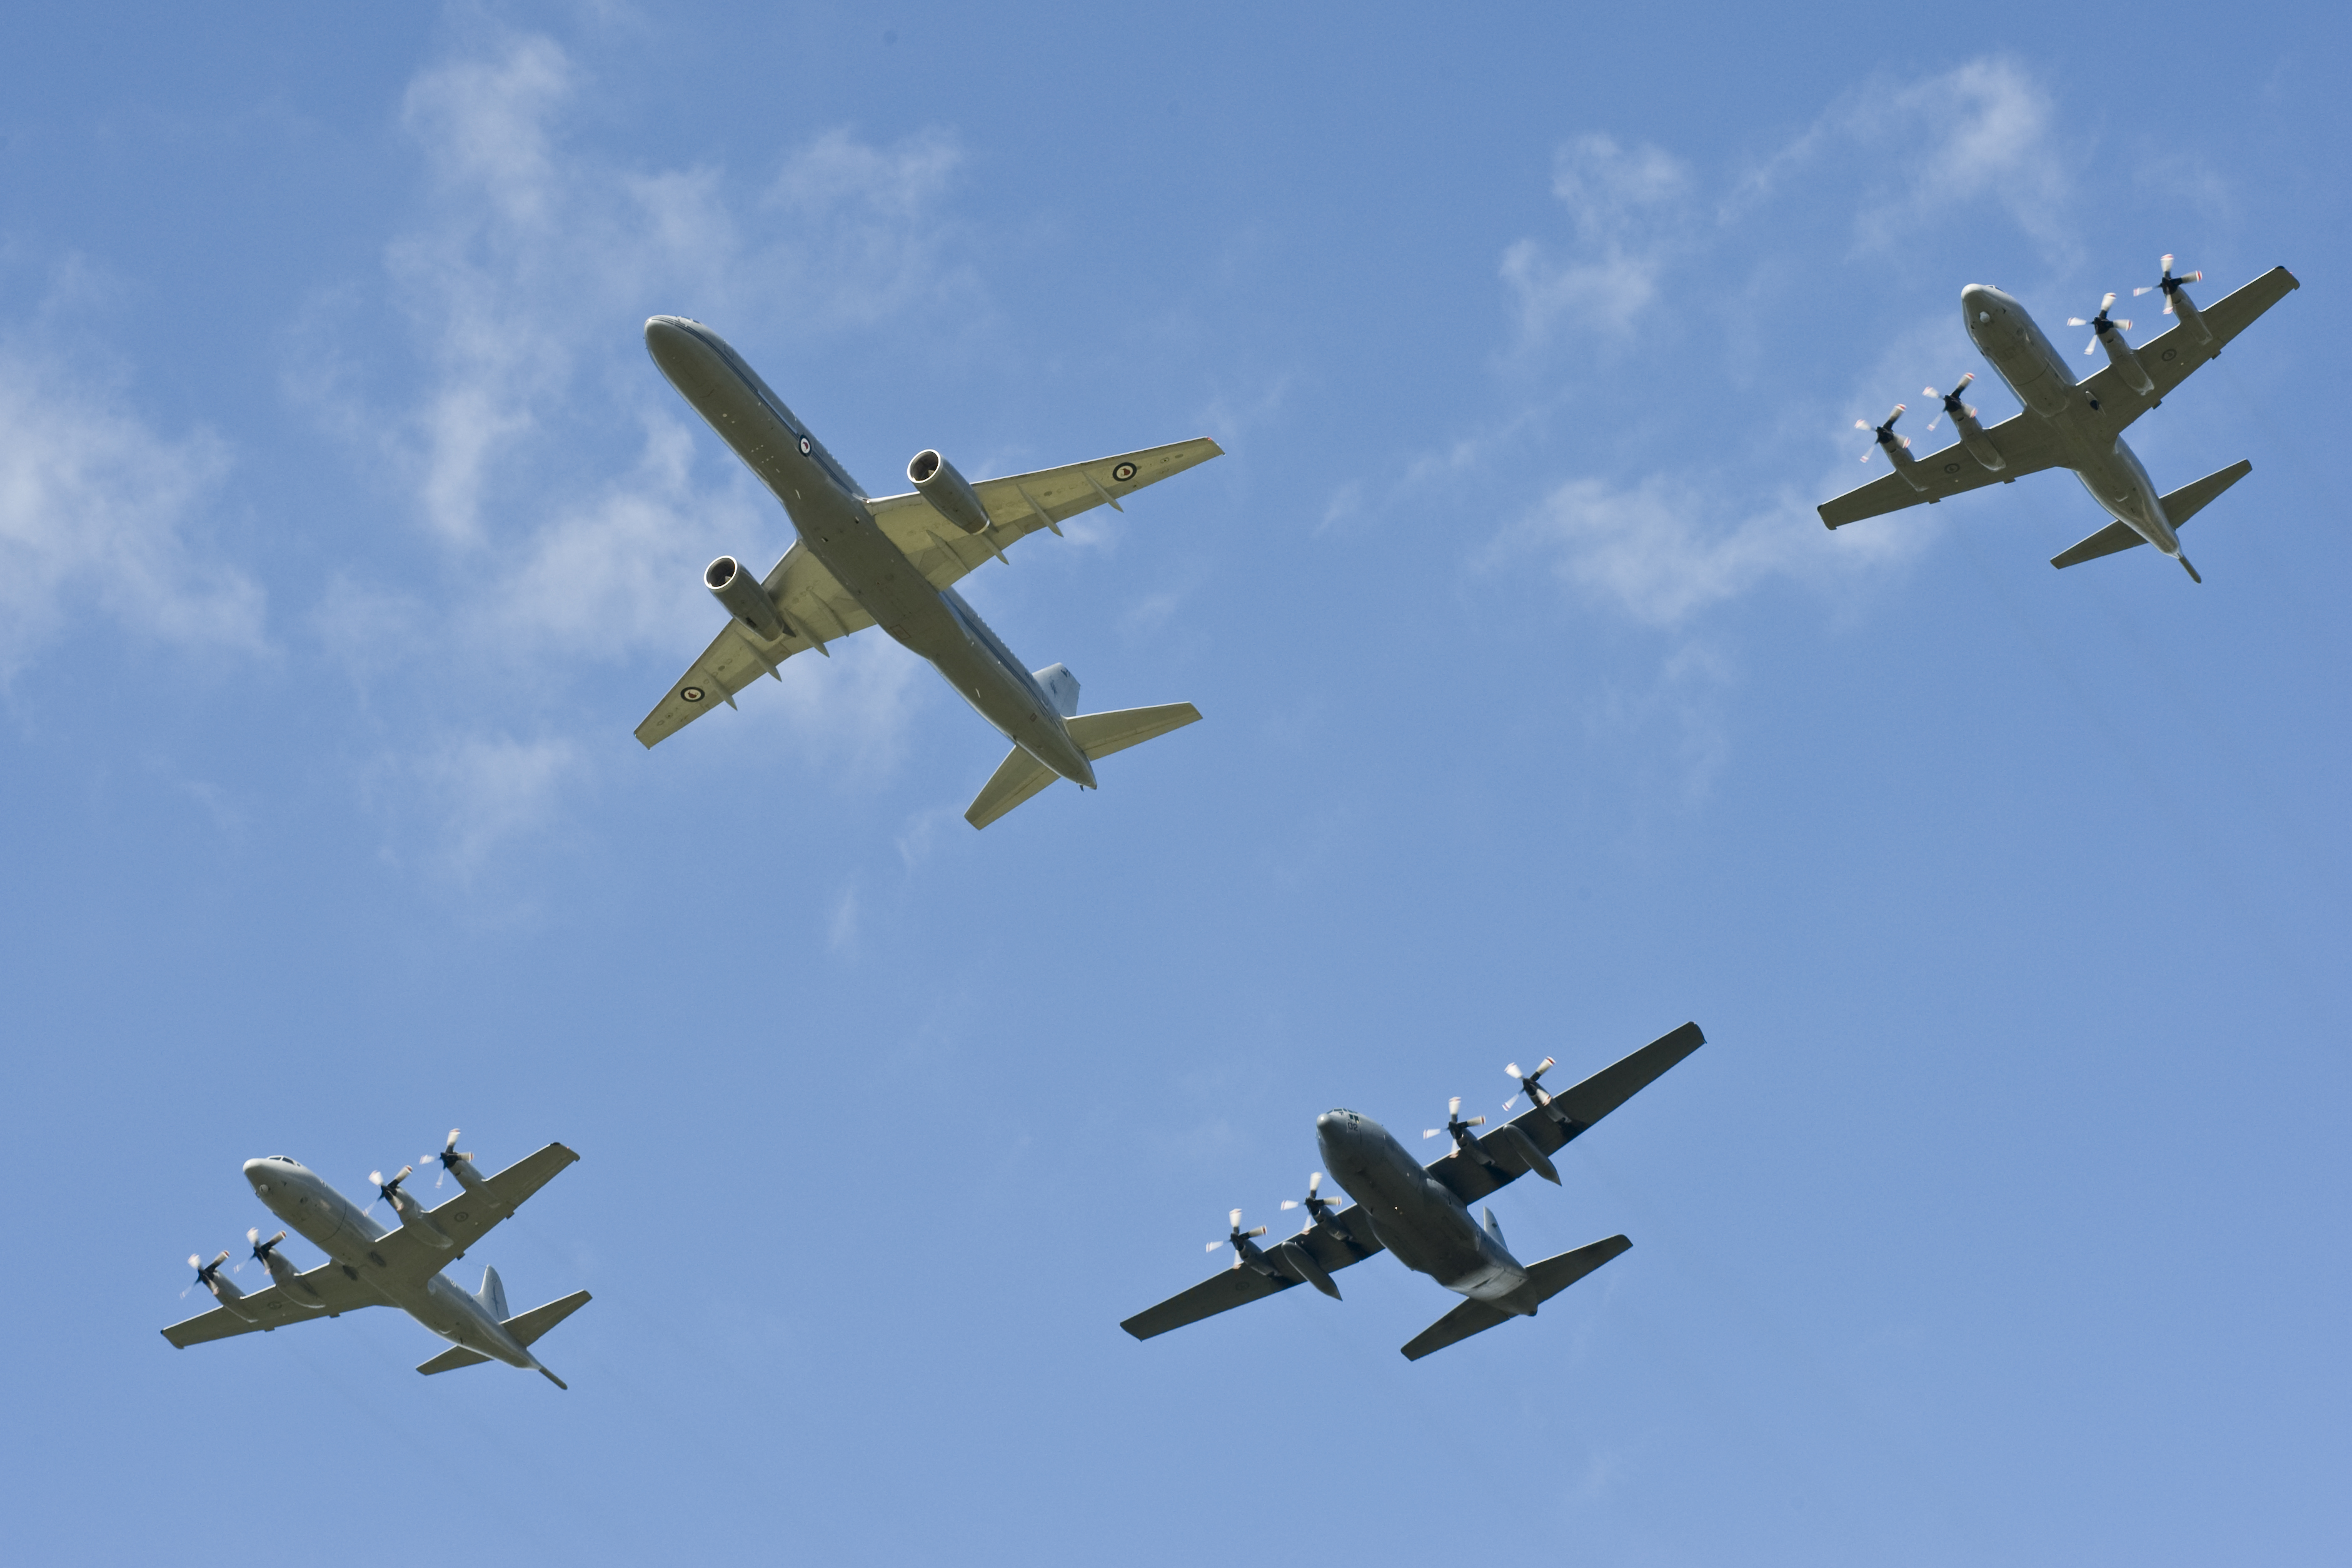 https://upload.wikimedia.org/wikipedia/commons/e/e4/Air_Force_%22Formation_Thunder%22_-_Flickr_-_NZ_Defence_Force.jpg